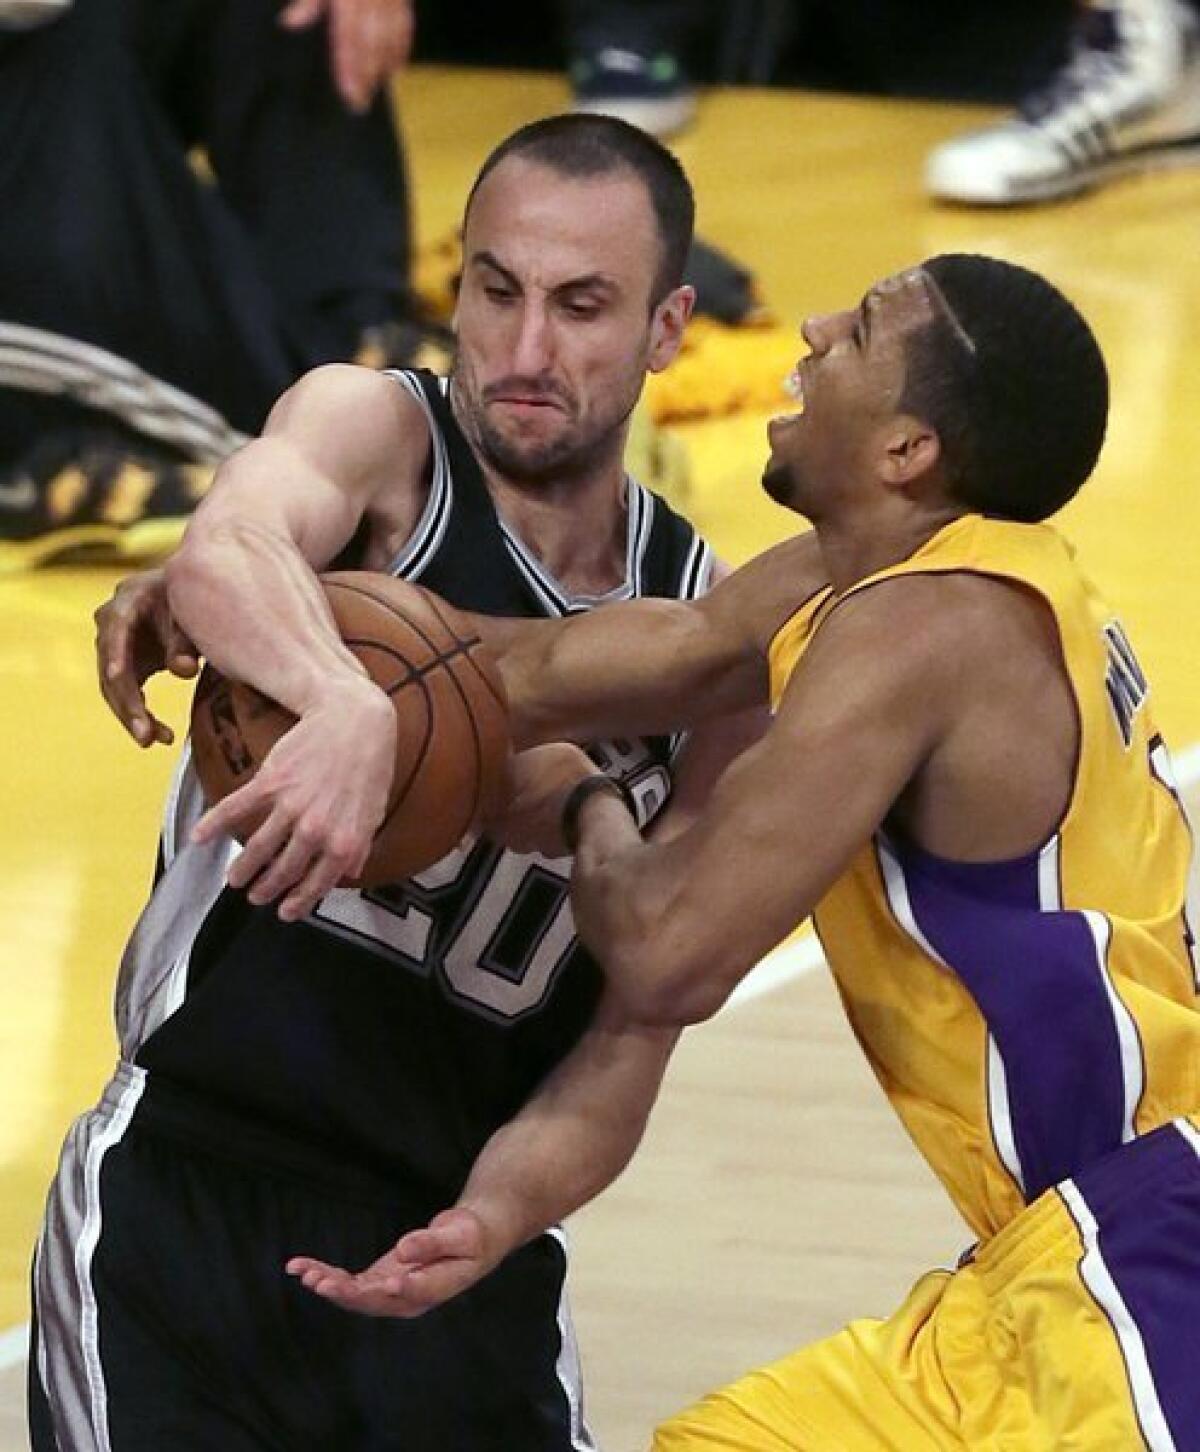 Lakers point guard Darius Morris, who had 24 points, is tied up by Spurs guard Manu Ginobili on a drive in the second half Friday night.